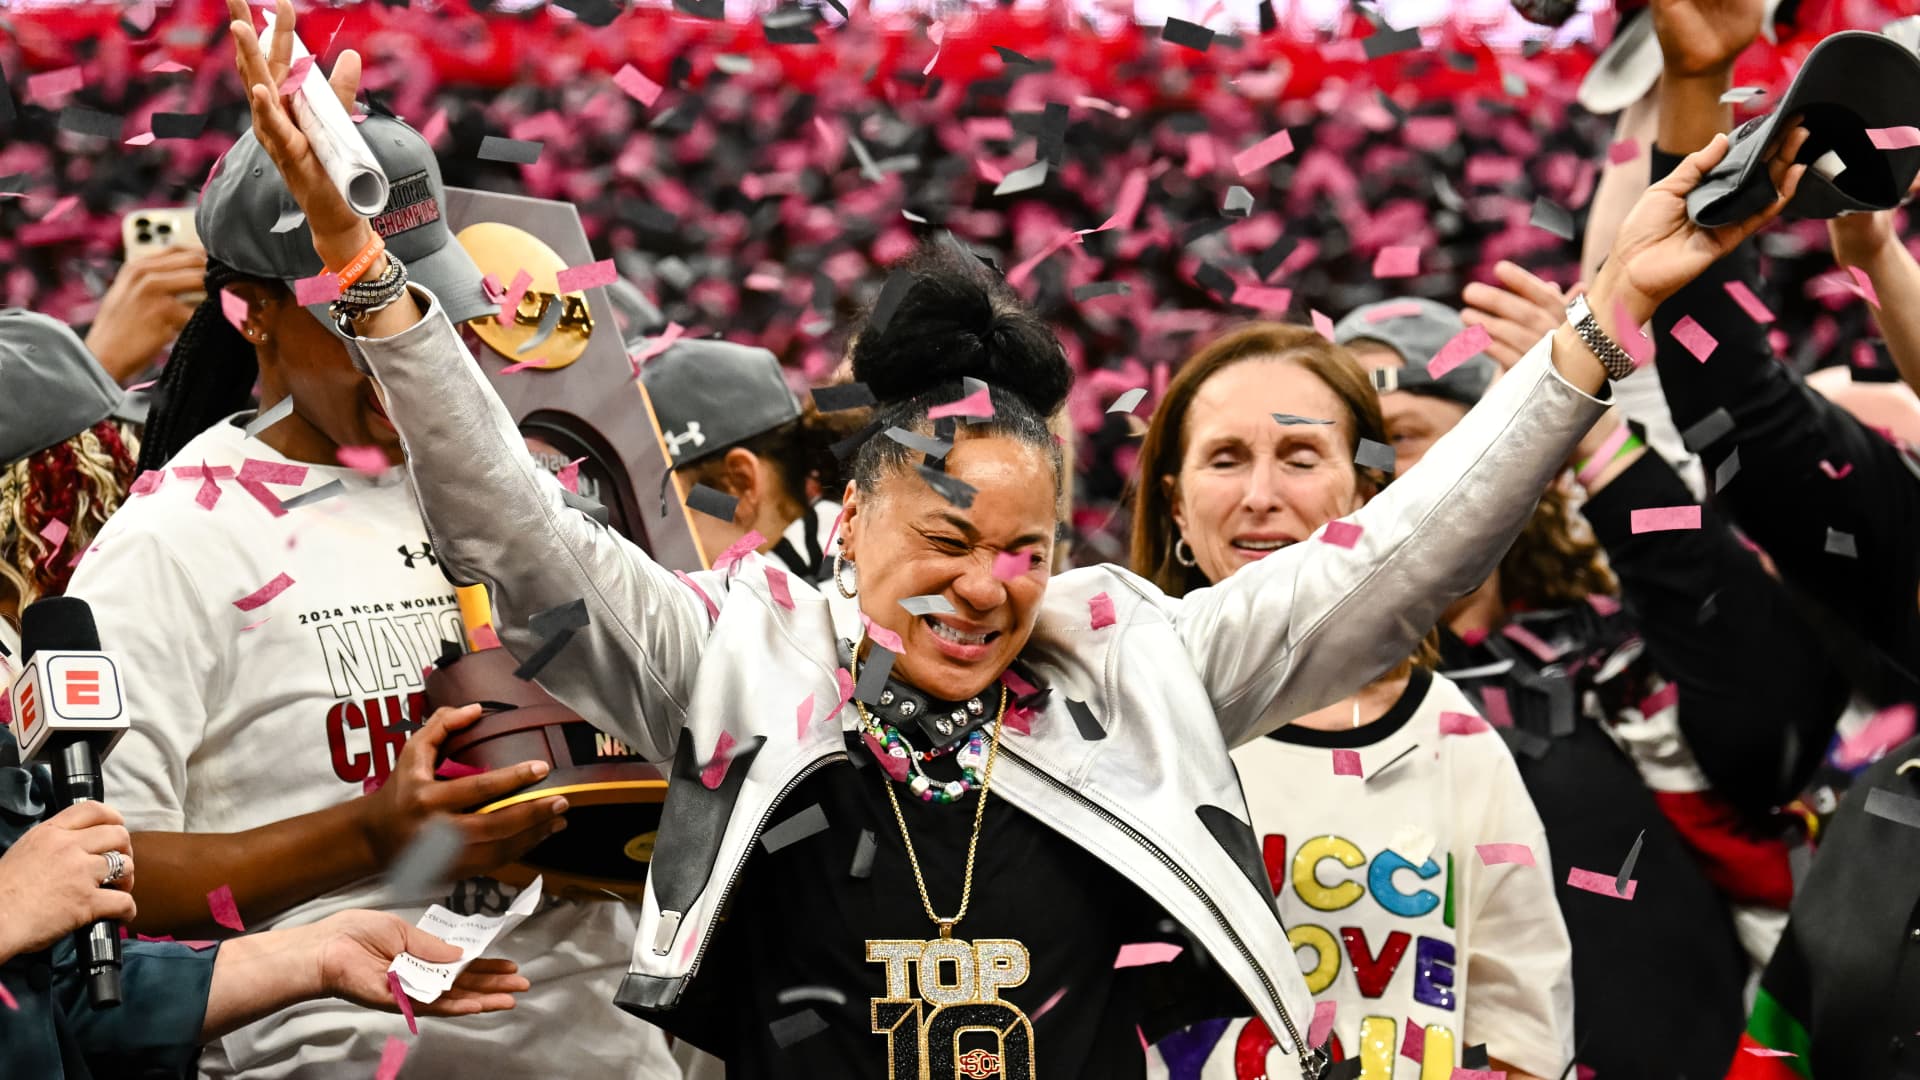 South Carolina coach Dawn Staley says women’s basketball will get ‘better and better’